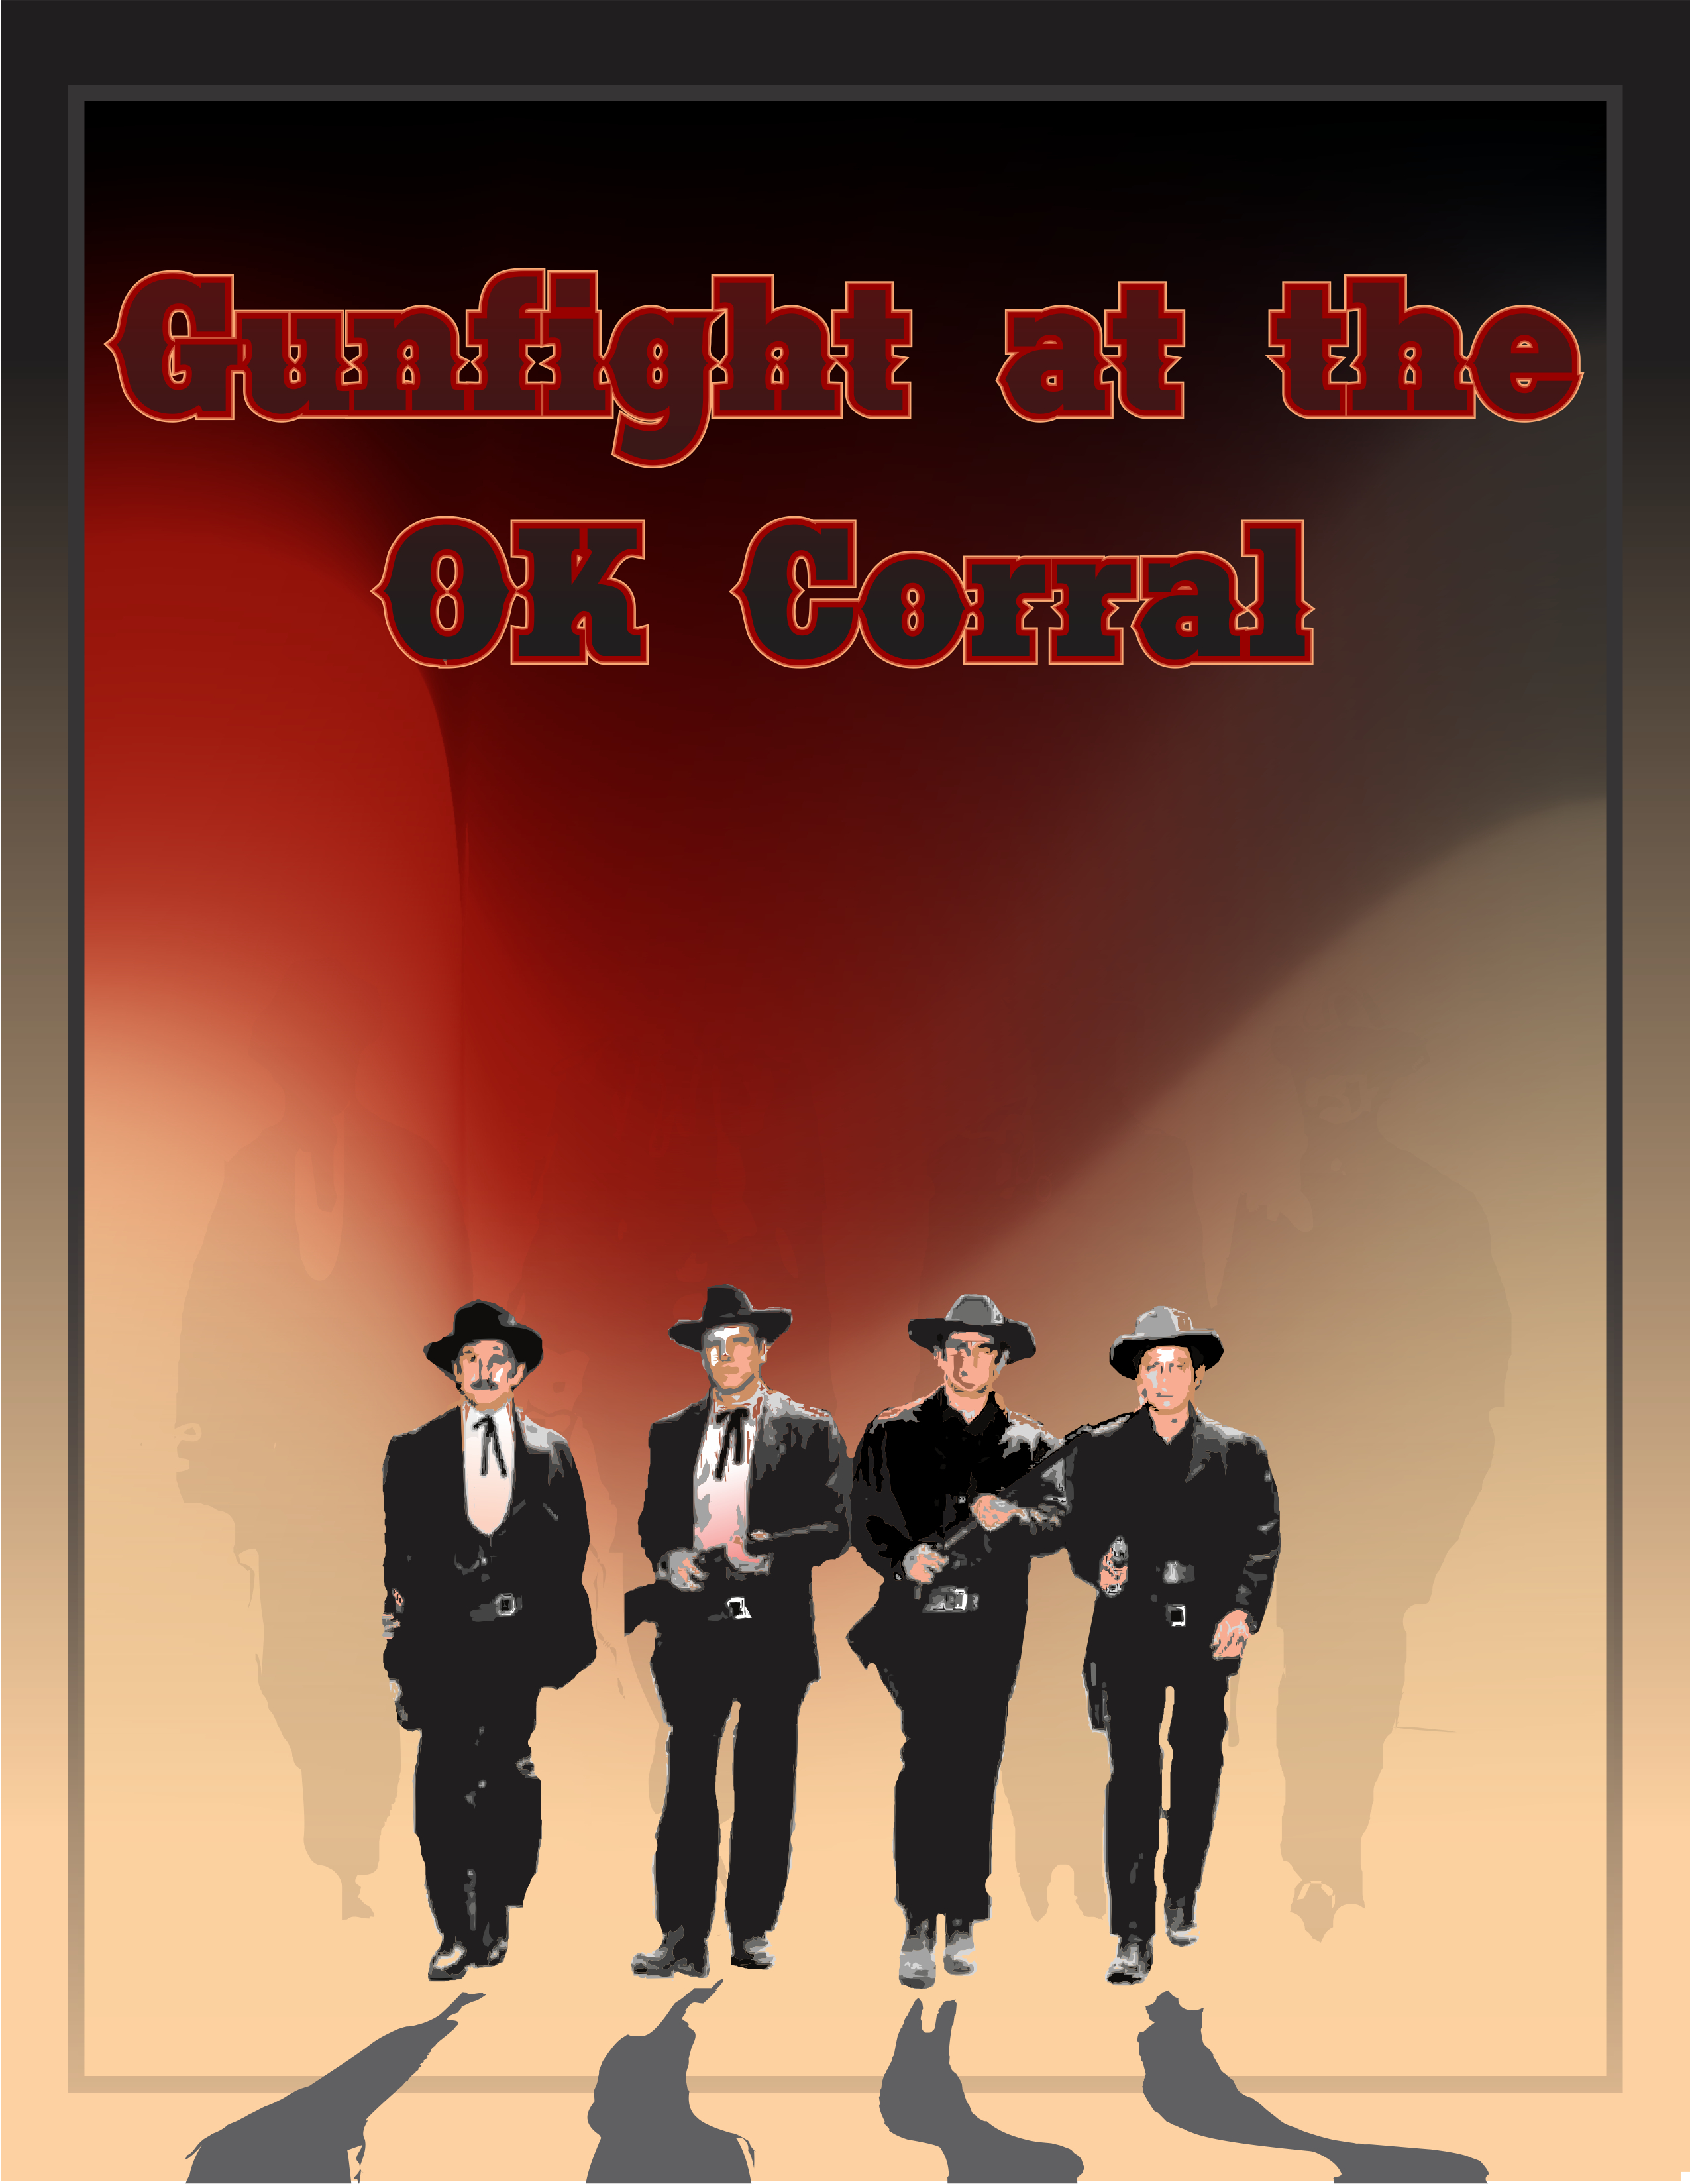 Iconic Image Gunfight At The Ok Corral My Favorite Westerns